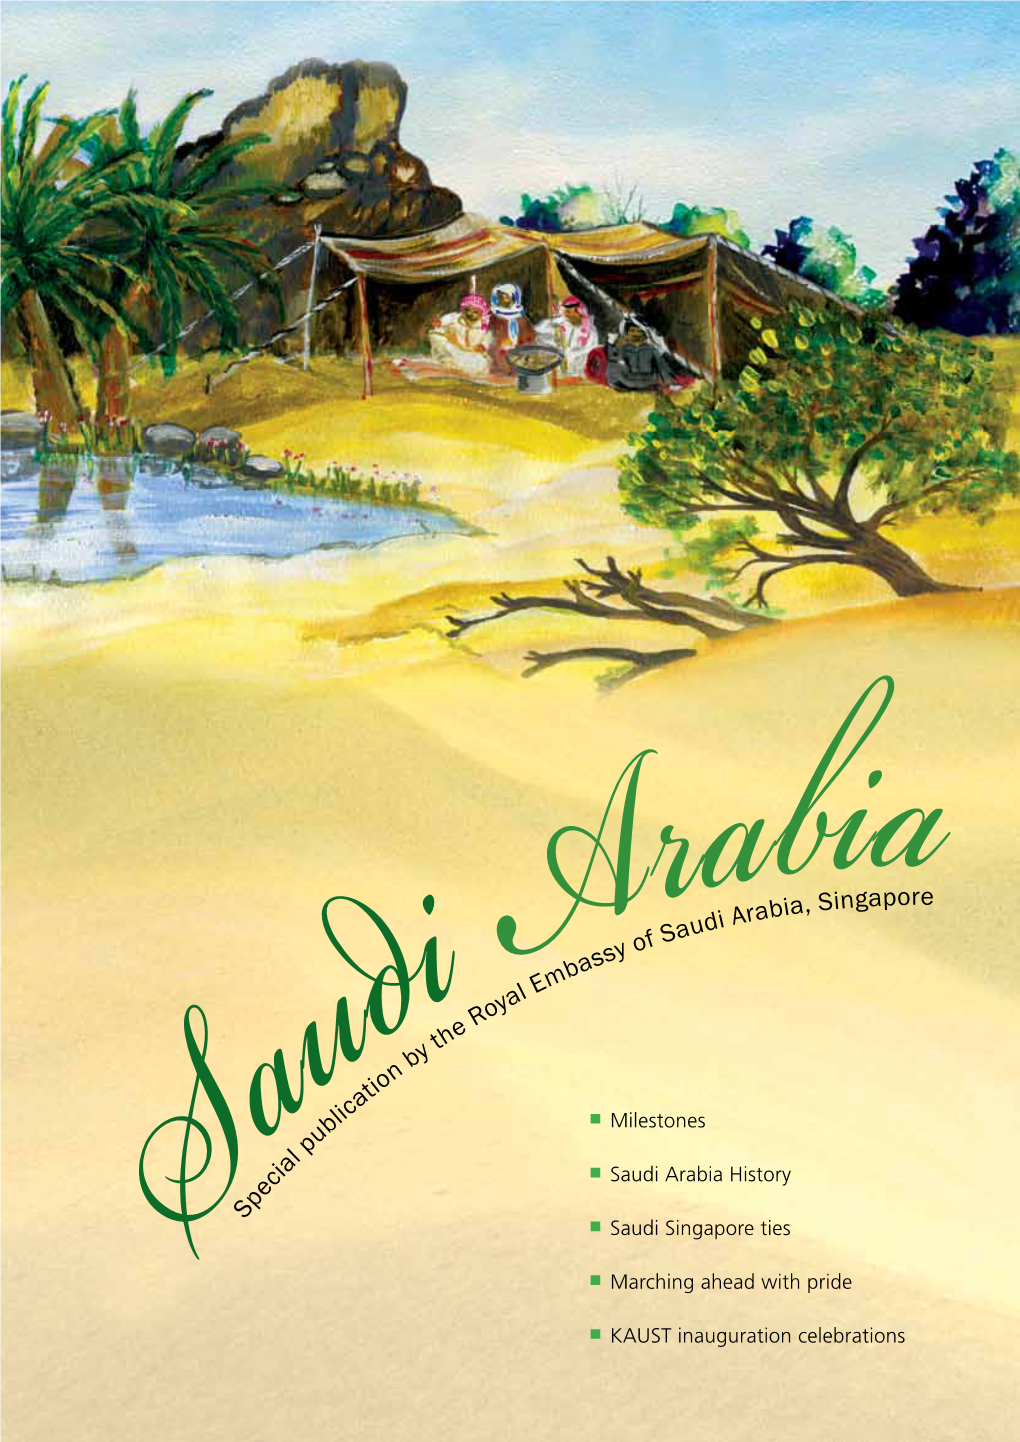 Special Publication by the Royal Embassy of Saudi Arabia, Singapore